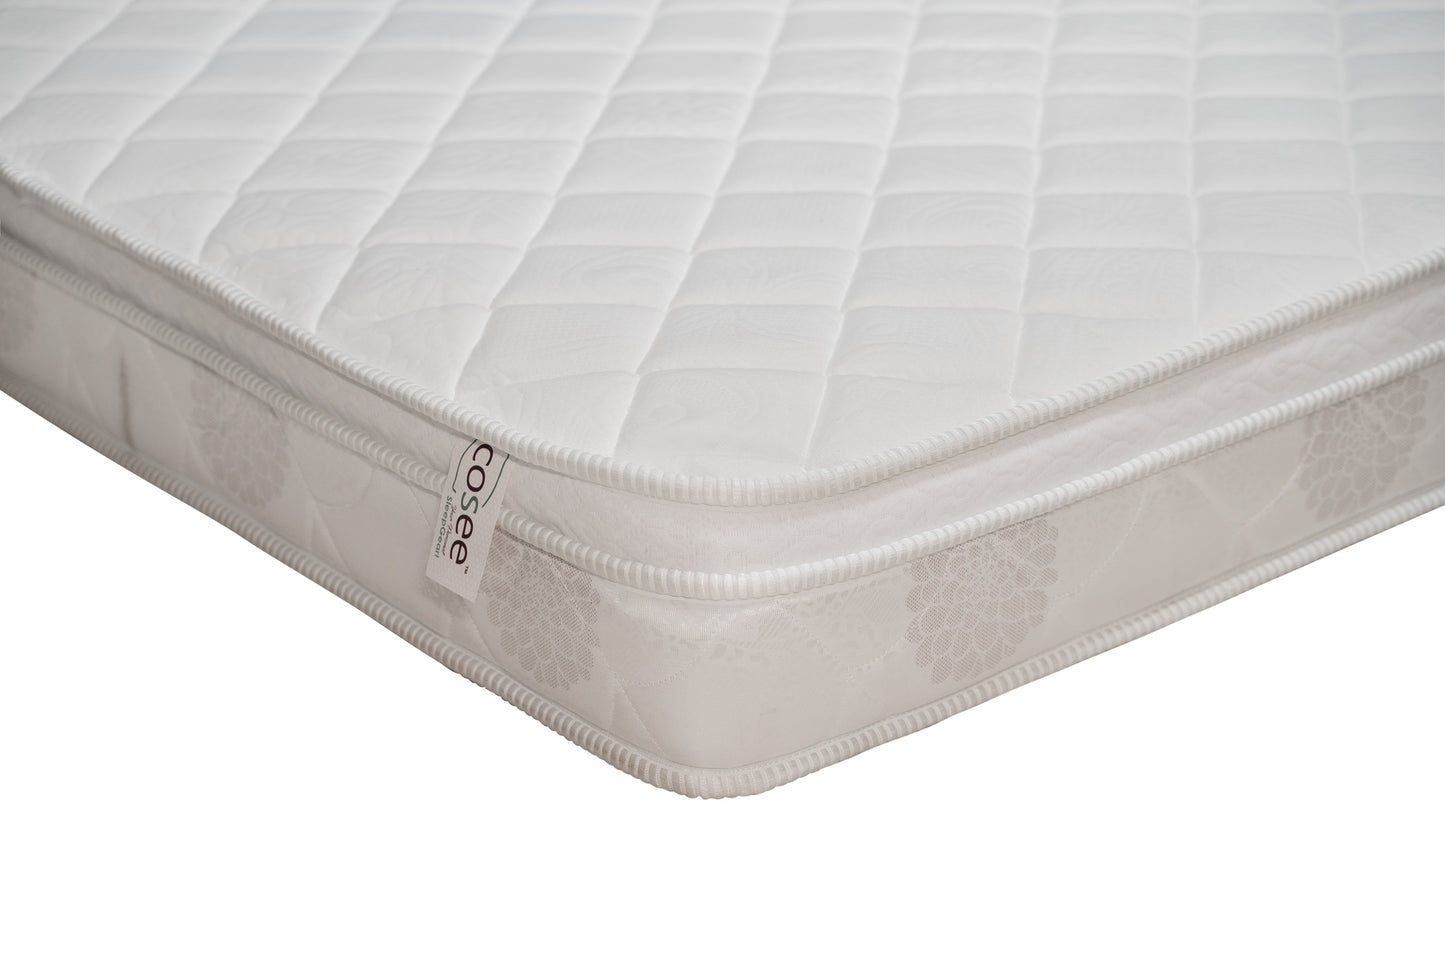 Quilted Reflex and Memory Foam Luxury - SleepCosee